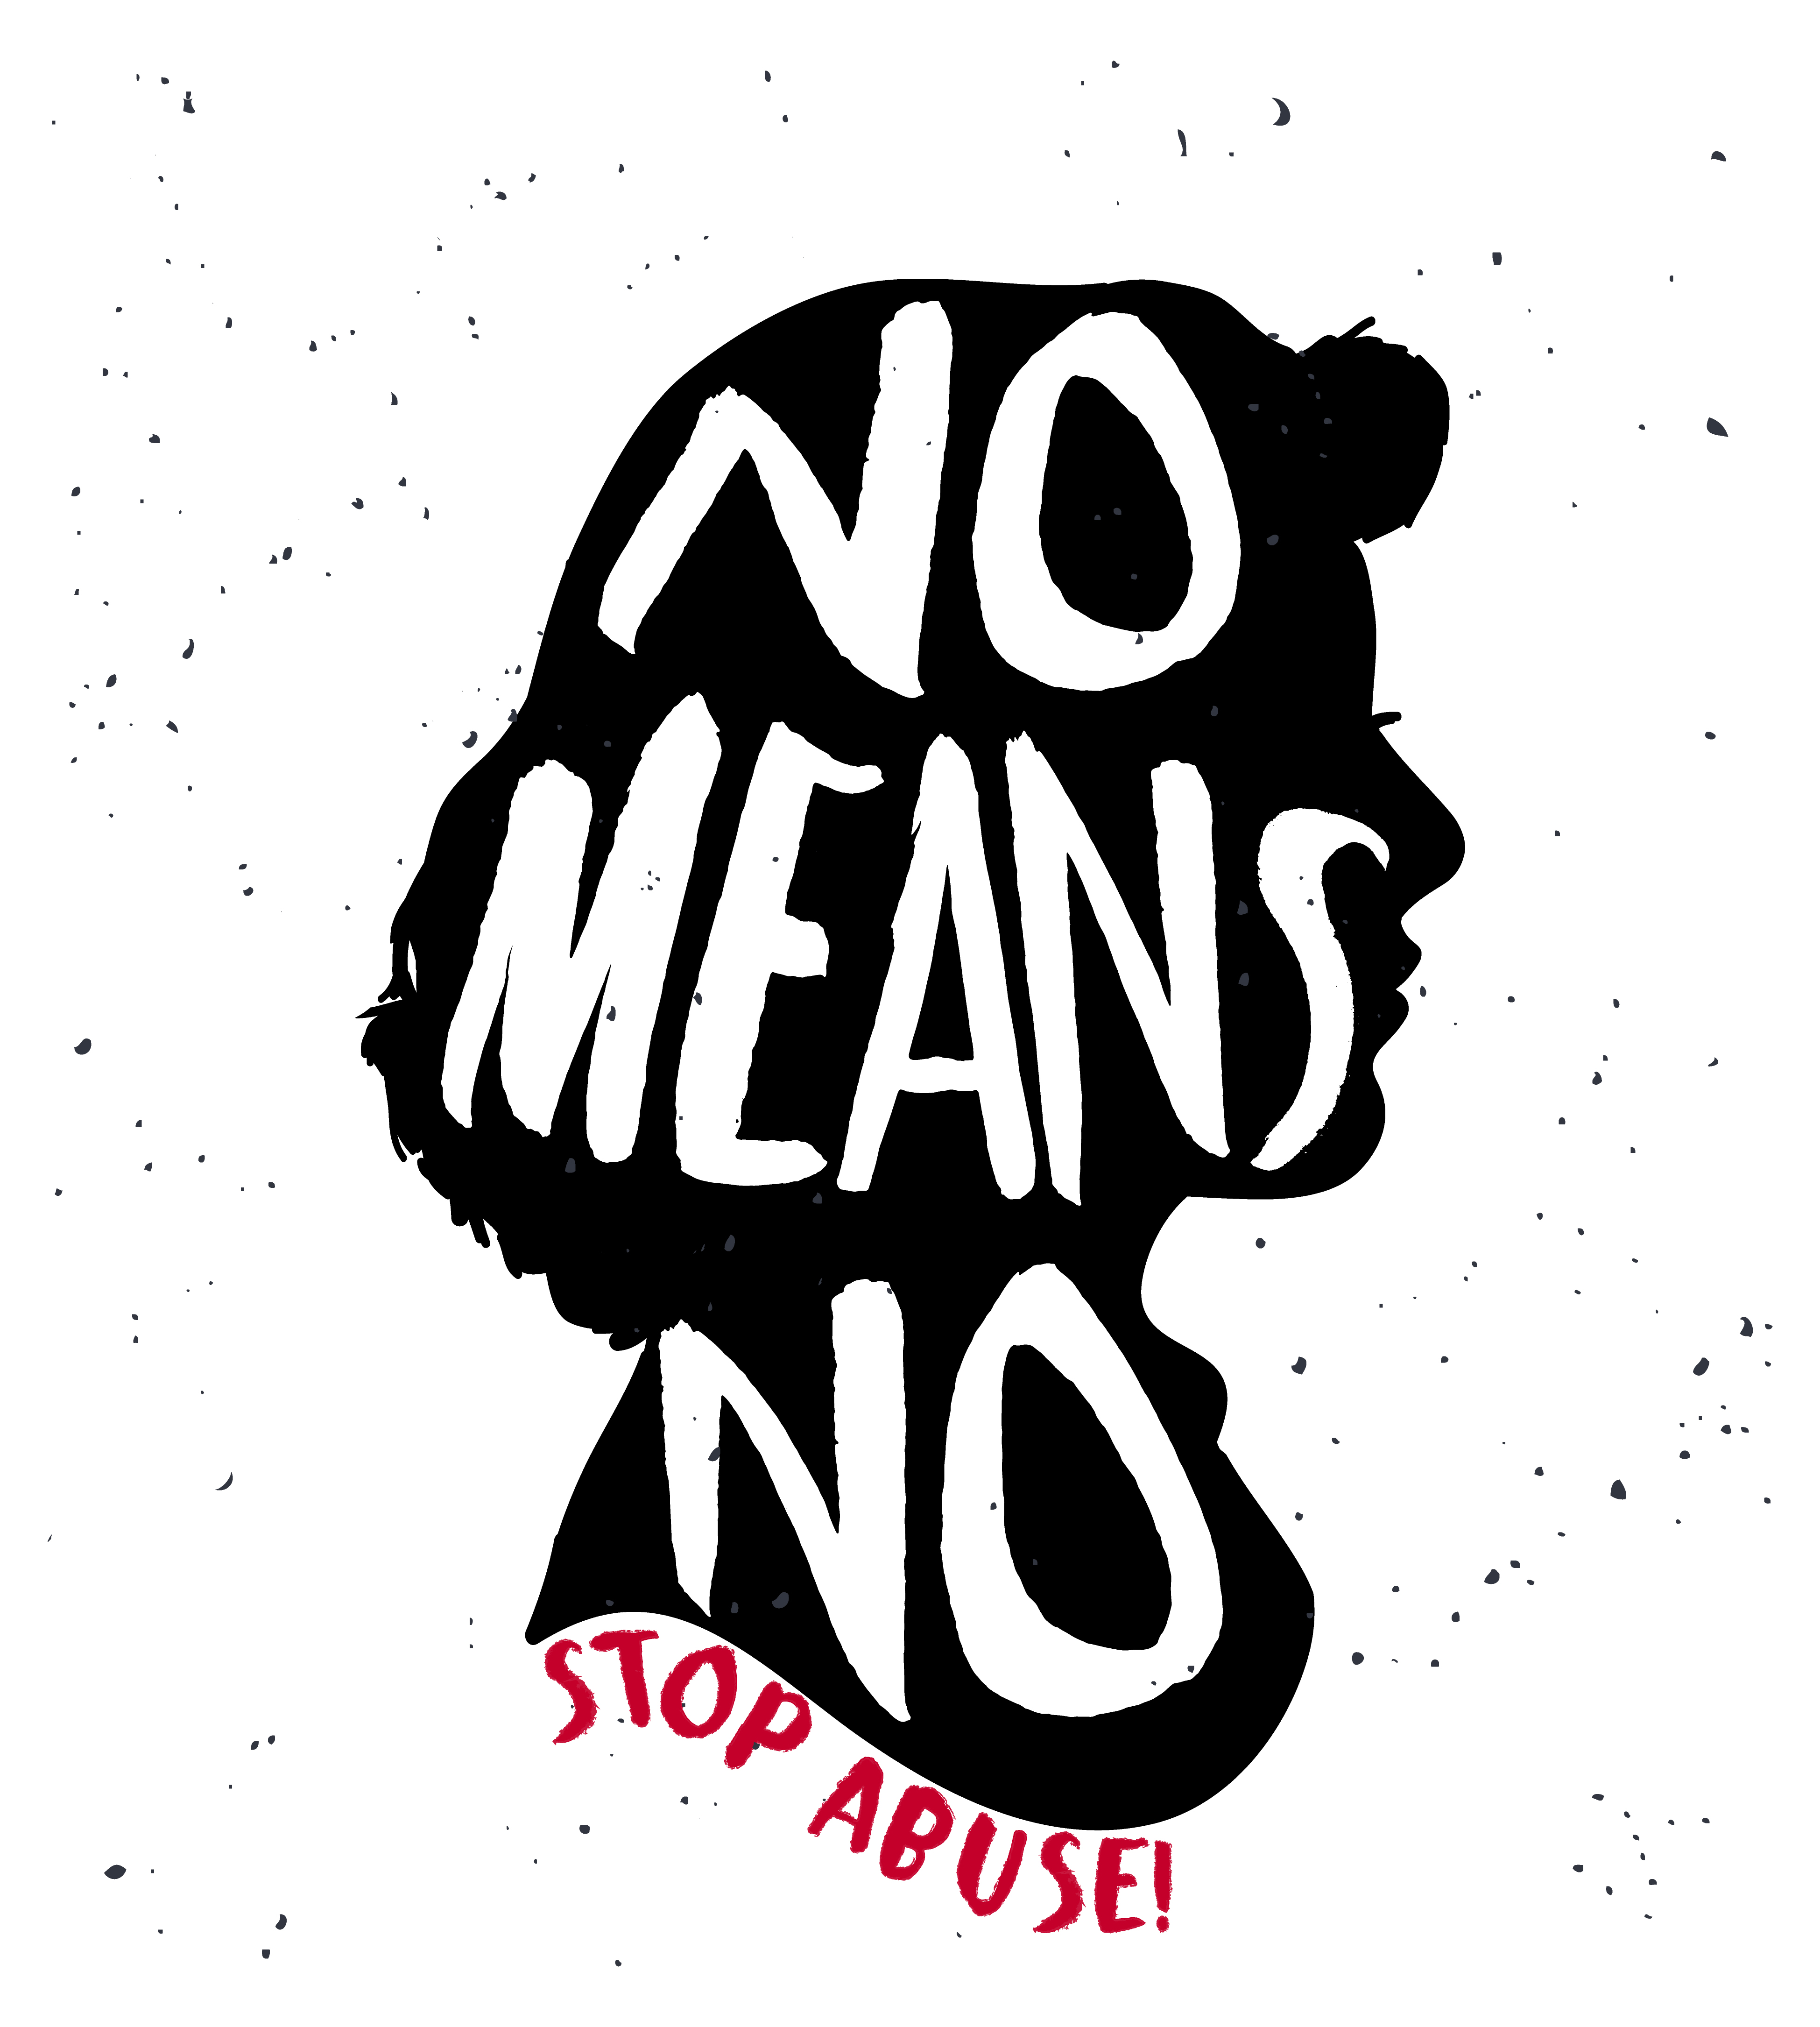 no means no graphic text on illustrated woman